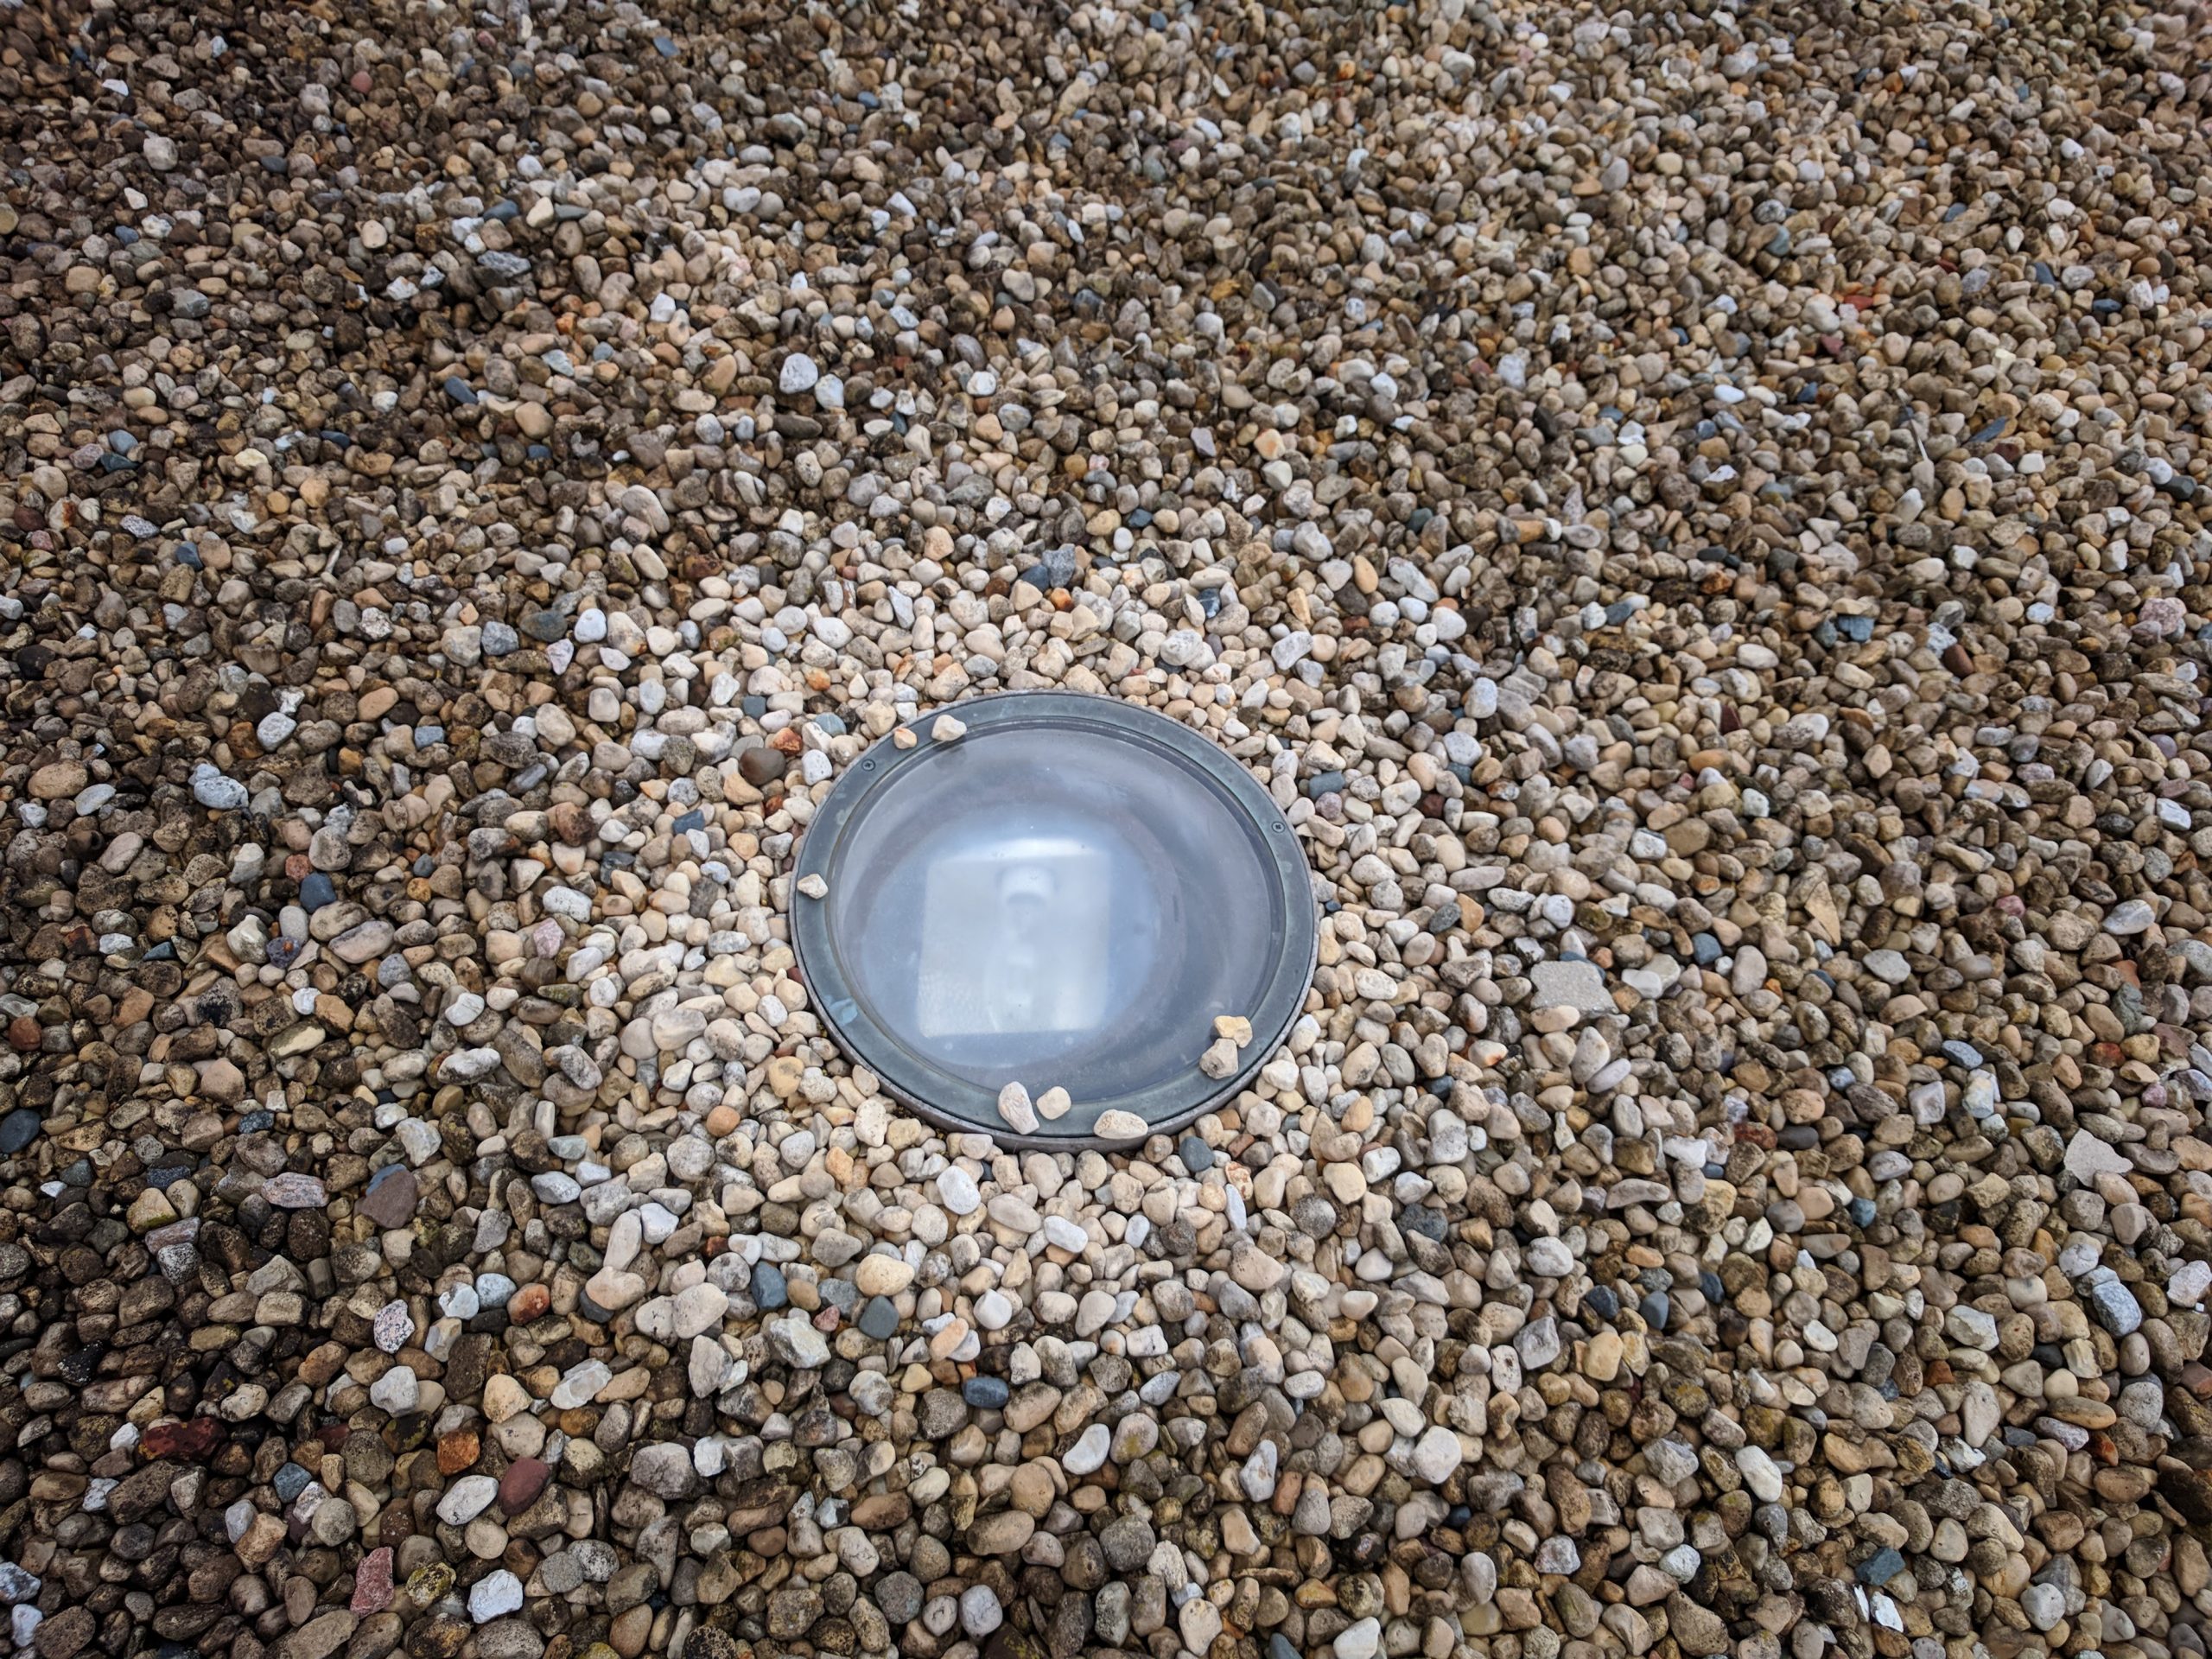 This light outside the Ramsey Auditorium warms and dries the gravel around it on a recent damp morning. Photo: Jason St. John, everyday objects